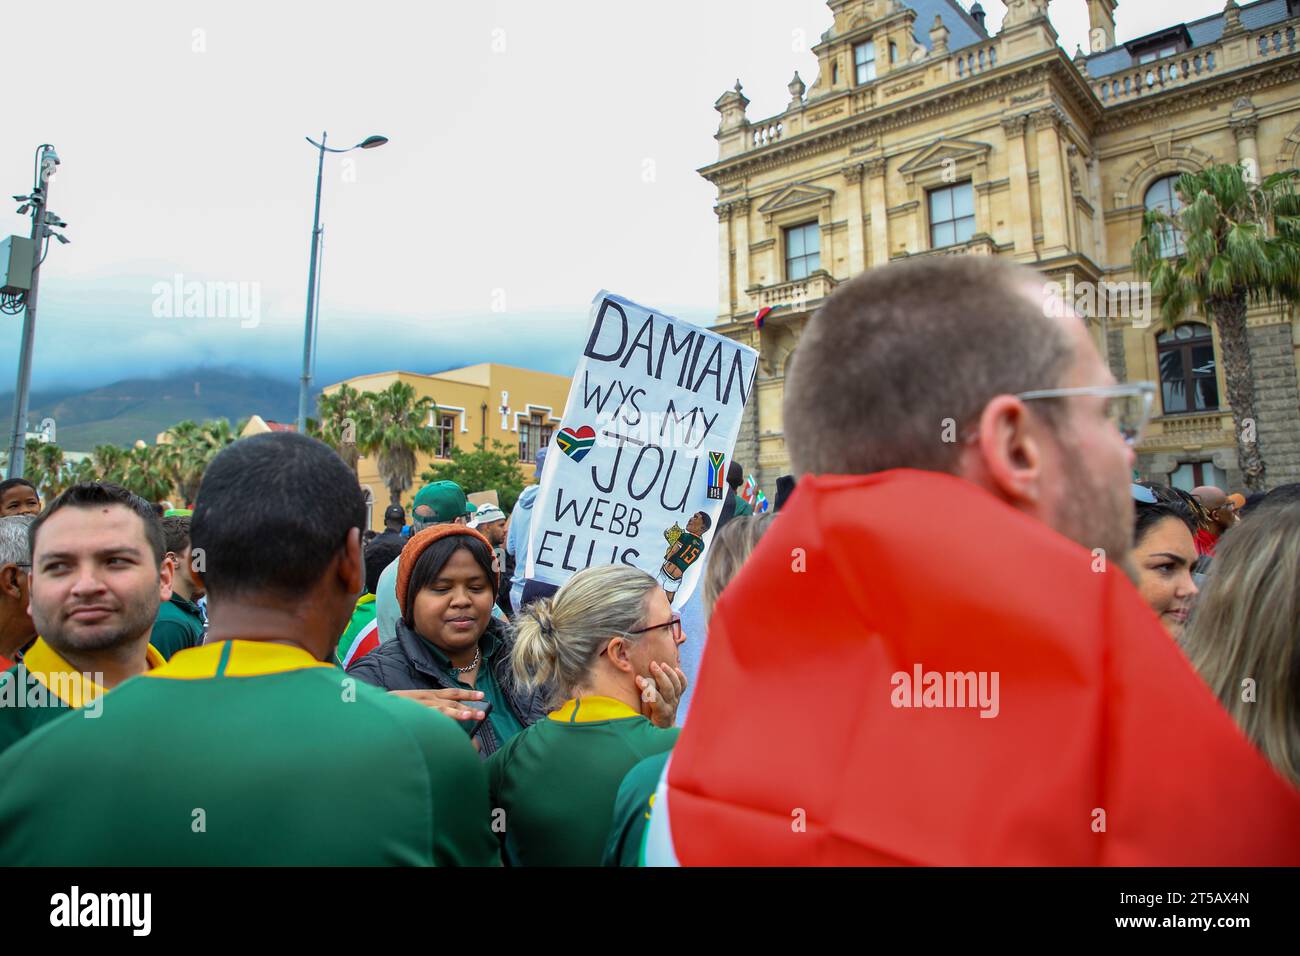 CAPE TOWN, SOUTH AFRICA - NOVEMBER 03: a fan hold up placard in Afrikaans saying “Damian show me your Webb Ellis” (tattoo) during the Springbok Trophy tour in Cape Town on November 03, 2023 in Cape Town, South Africa. The Springboks beat the New Zealand All Blacks 12-11 to win the Rugby World Cup in Paris, France on Saturday 28 October 2023. (Photo by Roger Sedres) Stock Photo